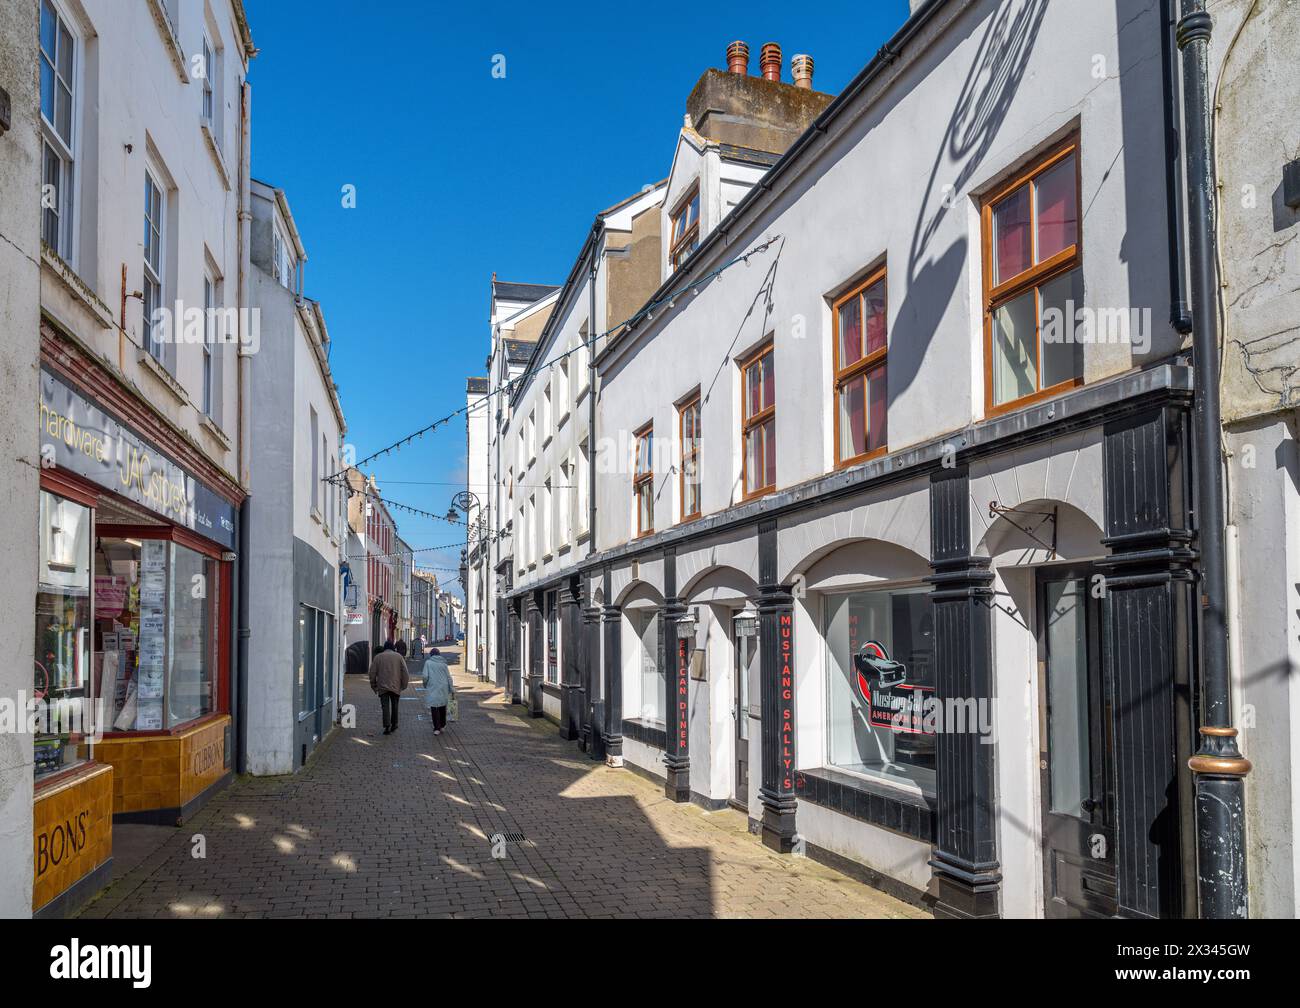 Arbory Street in the town centre, Castletown, Isle of Man, England, UK Stock Photo